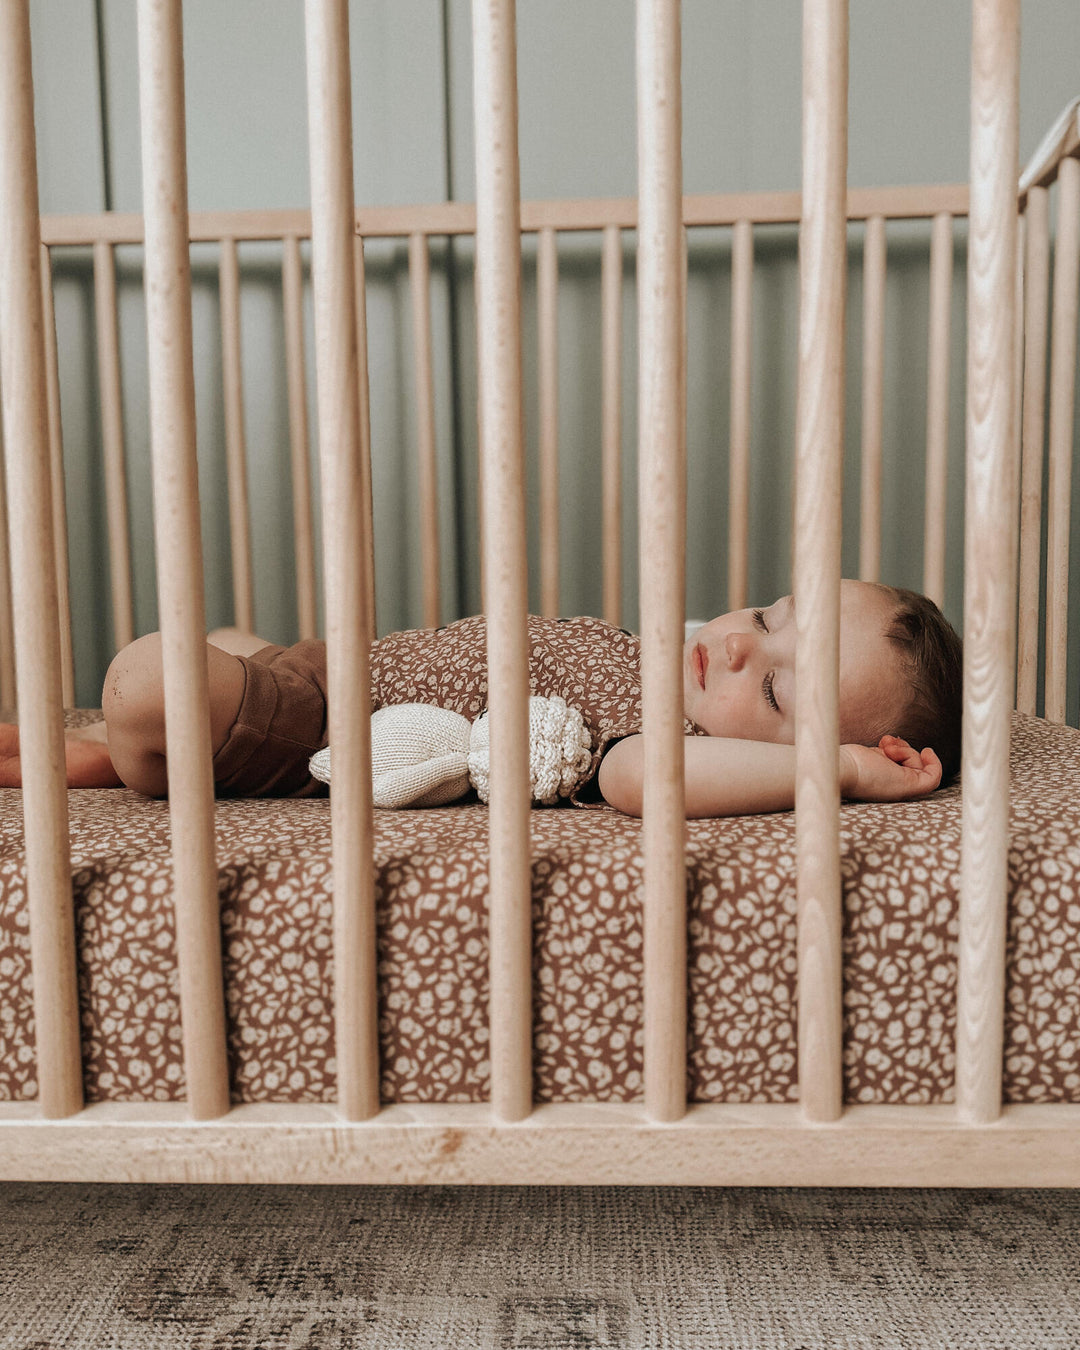 Child sleeping in crib. Mattress in the crib is fitted with our crib sheet in the Latte Floral color option.